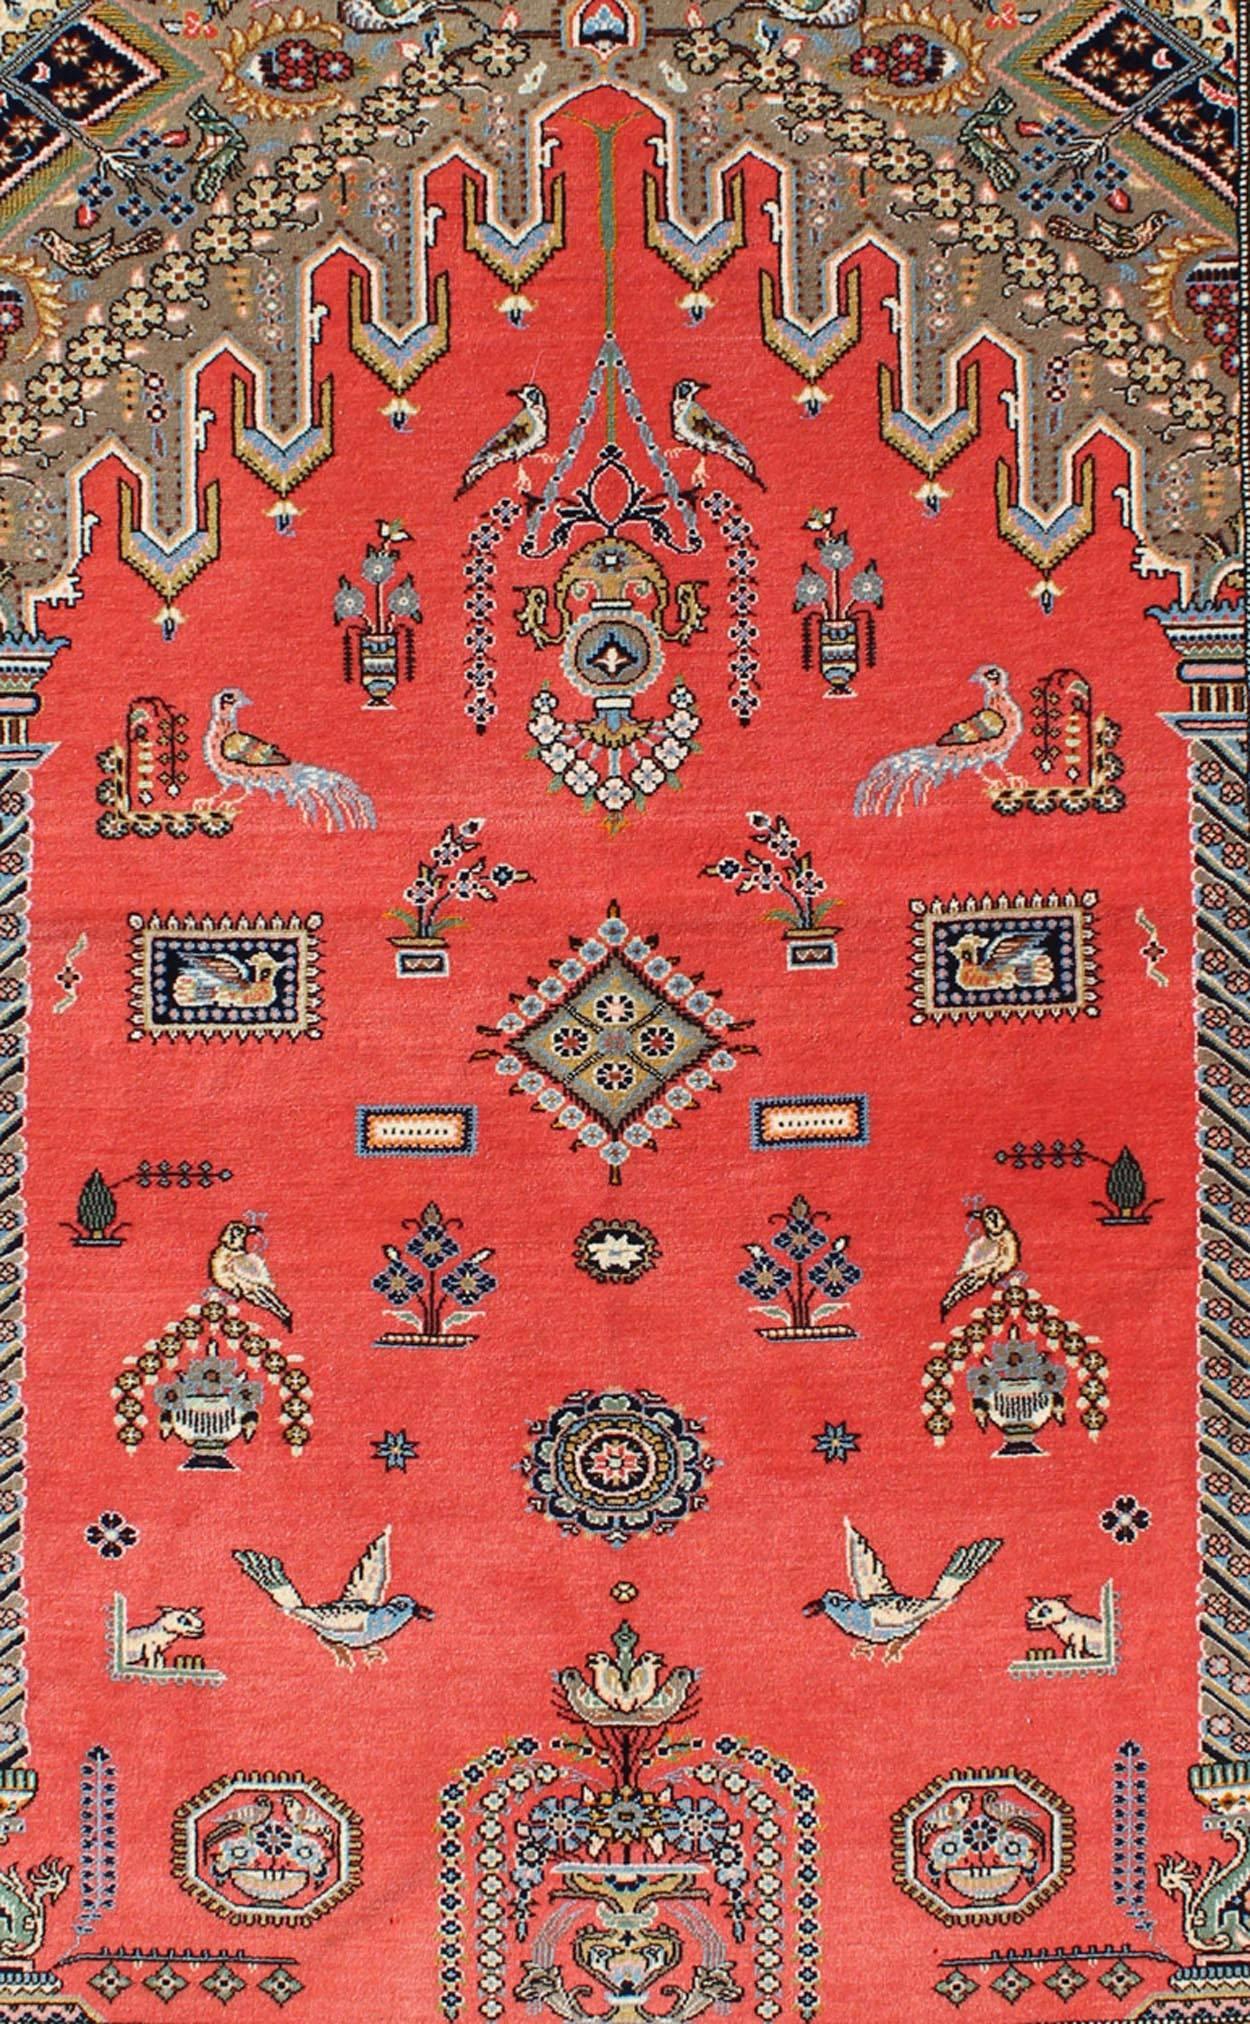 Tribal Vintage Fine Persian Qum Prayer Rug With Soft Red Field in Mihrab Design For Sale